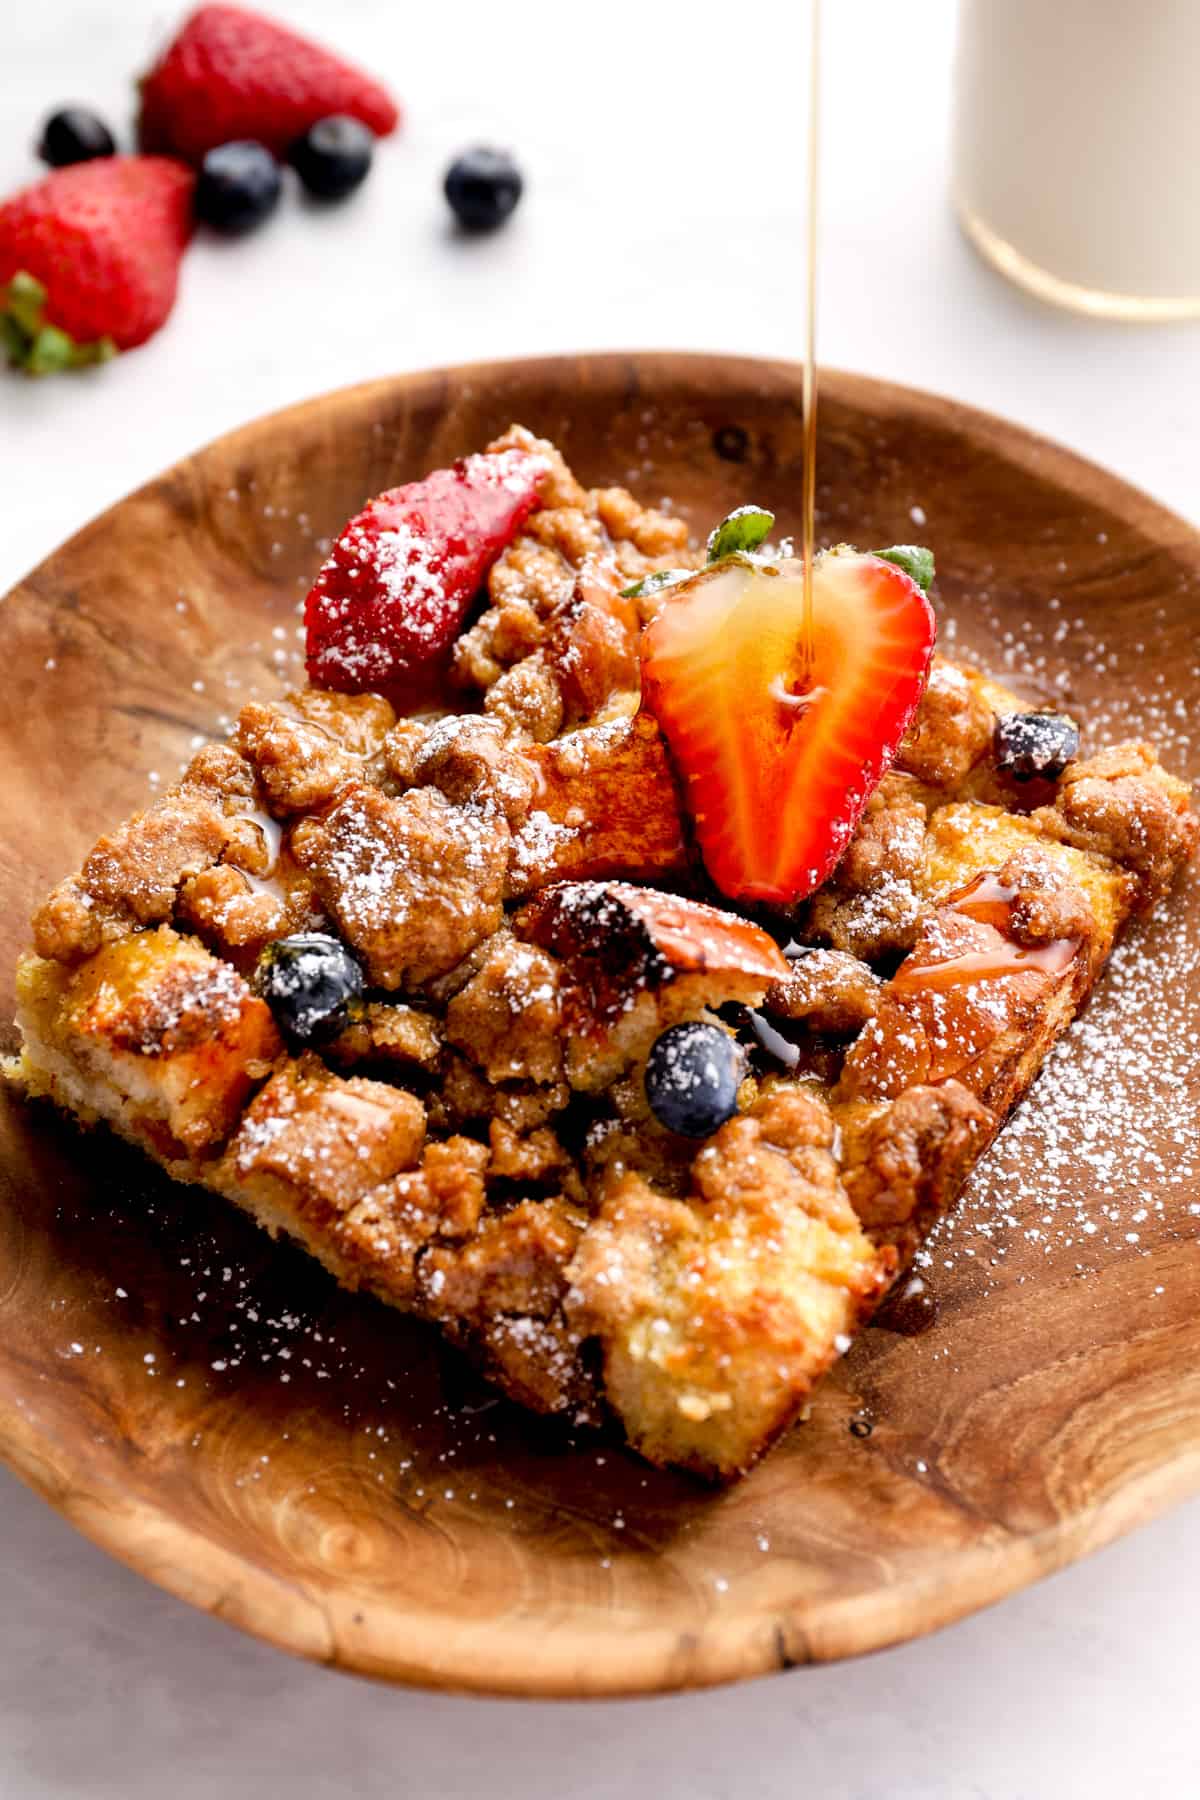 drizzling syrup on top of a slice of French toast casserole, topped with berries